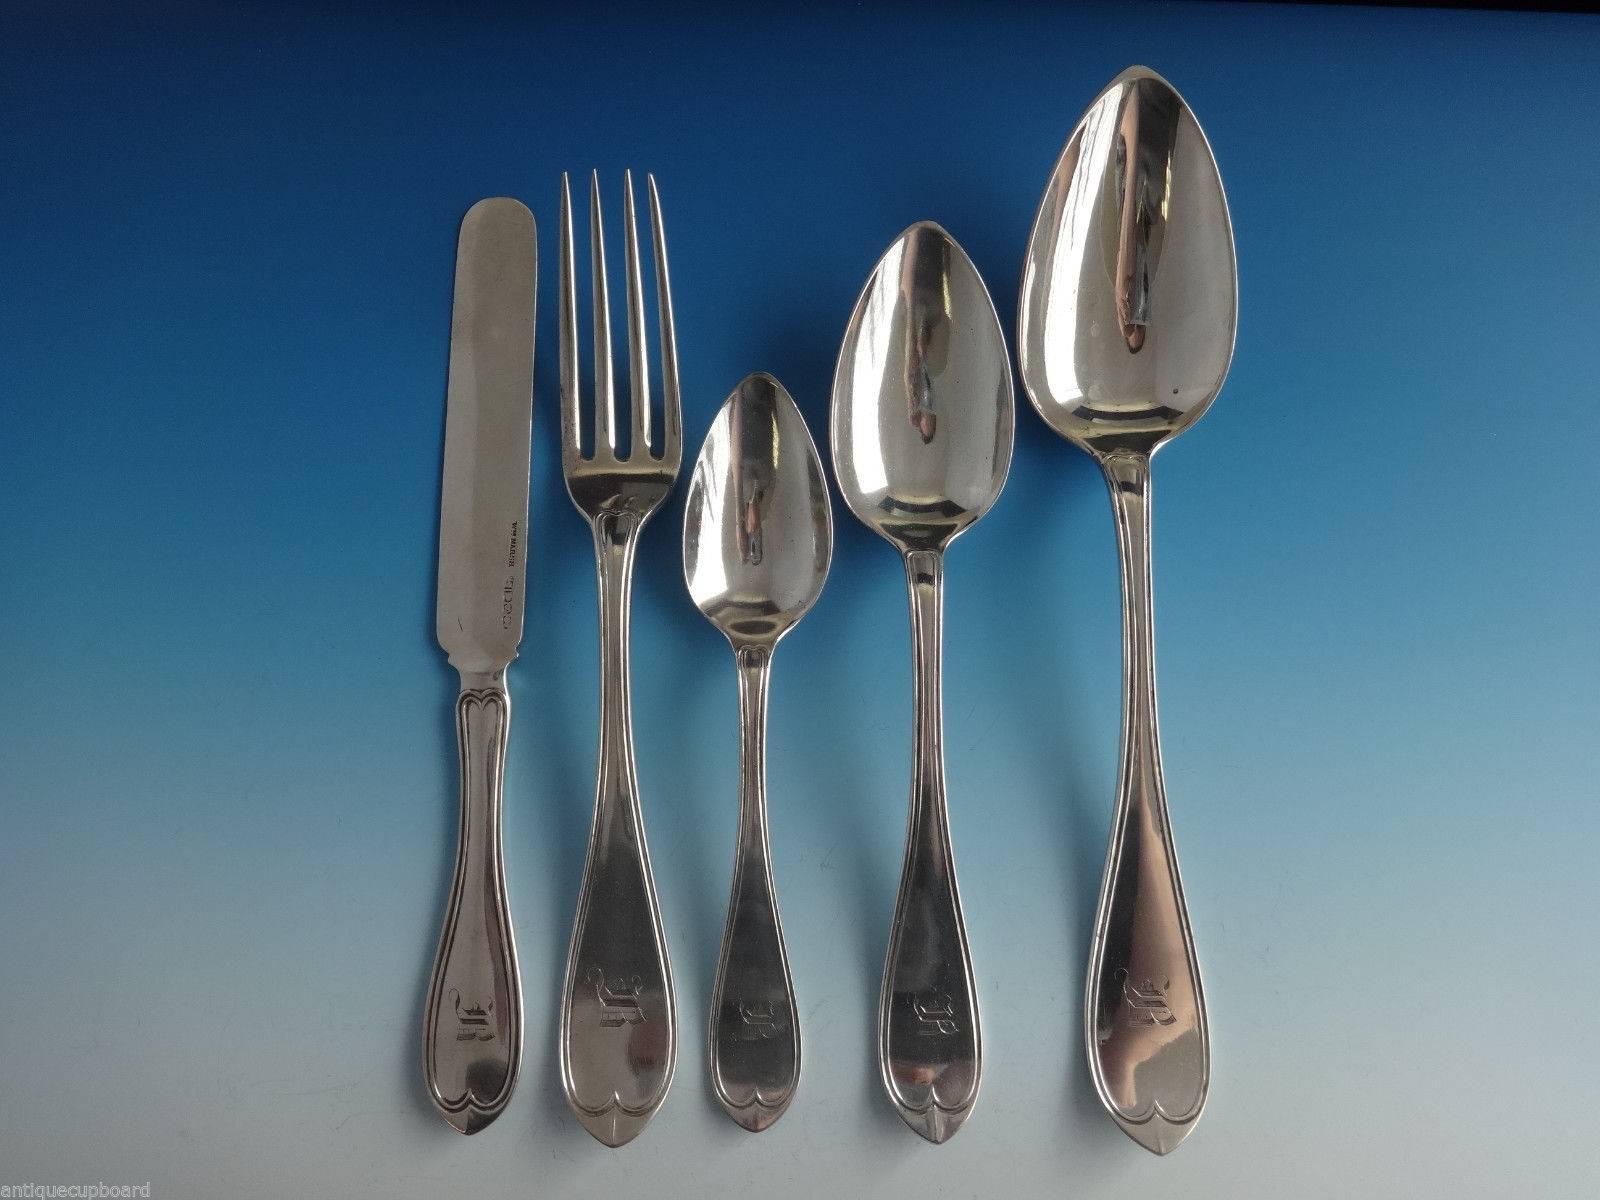 Early coin silver flatware set in fitted box by William Marsh. This set was presented to the head of the Old Astor House, Parker Jones, New York in the year 1859.

12 knives, flat handle, all-sterling, 7 3/4